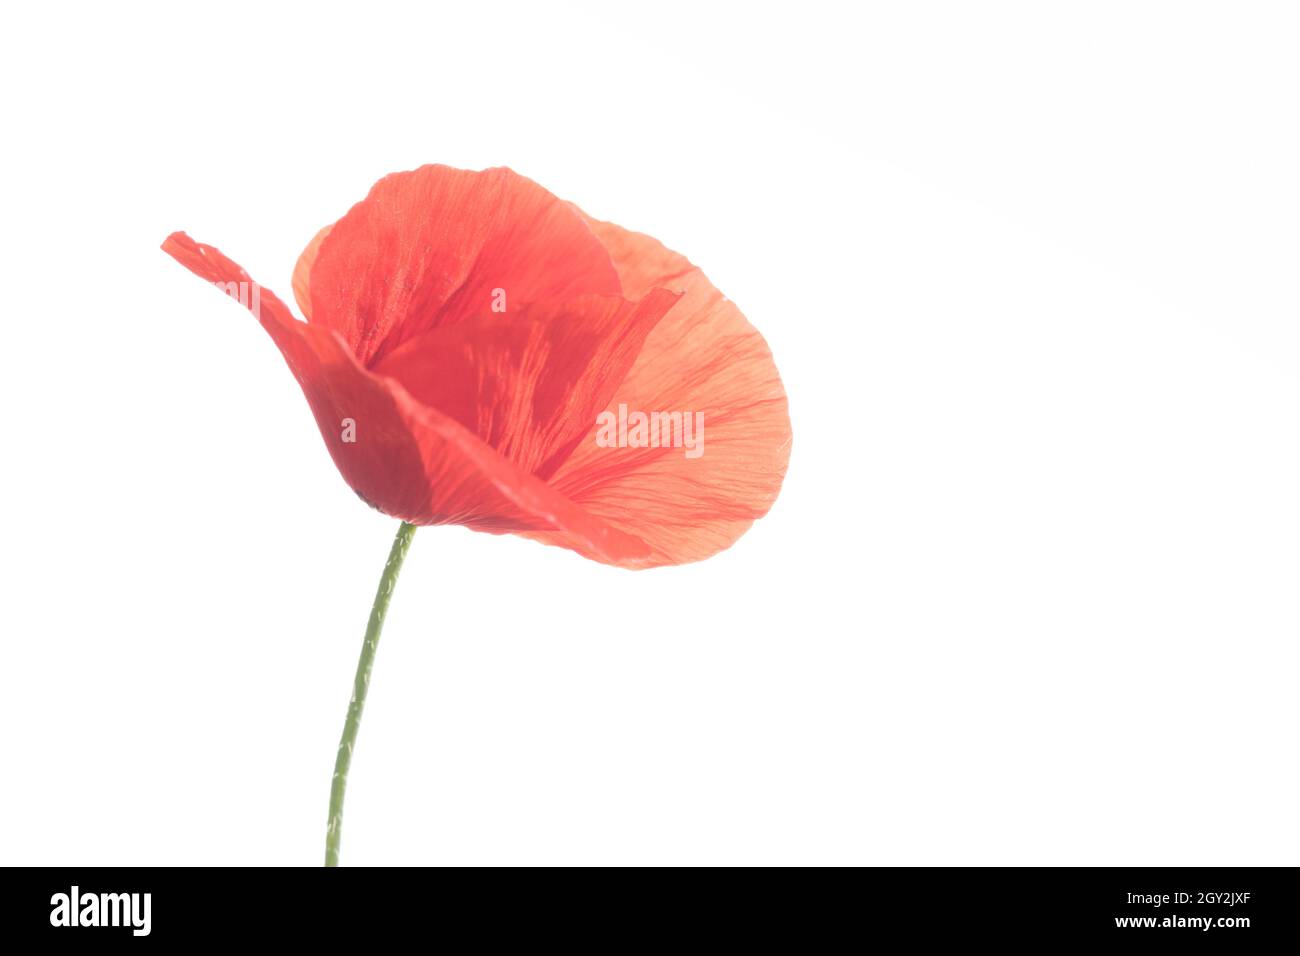 Red poppy flower isolated on white background Stock Photo